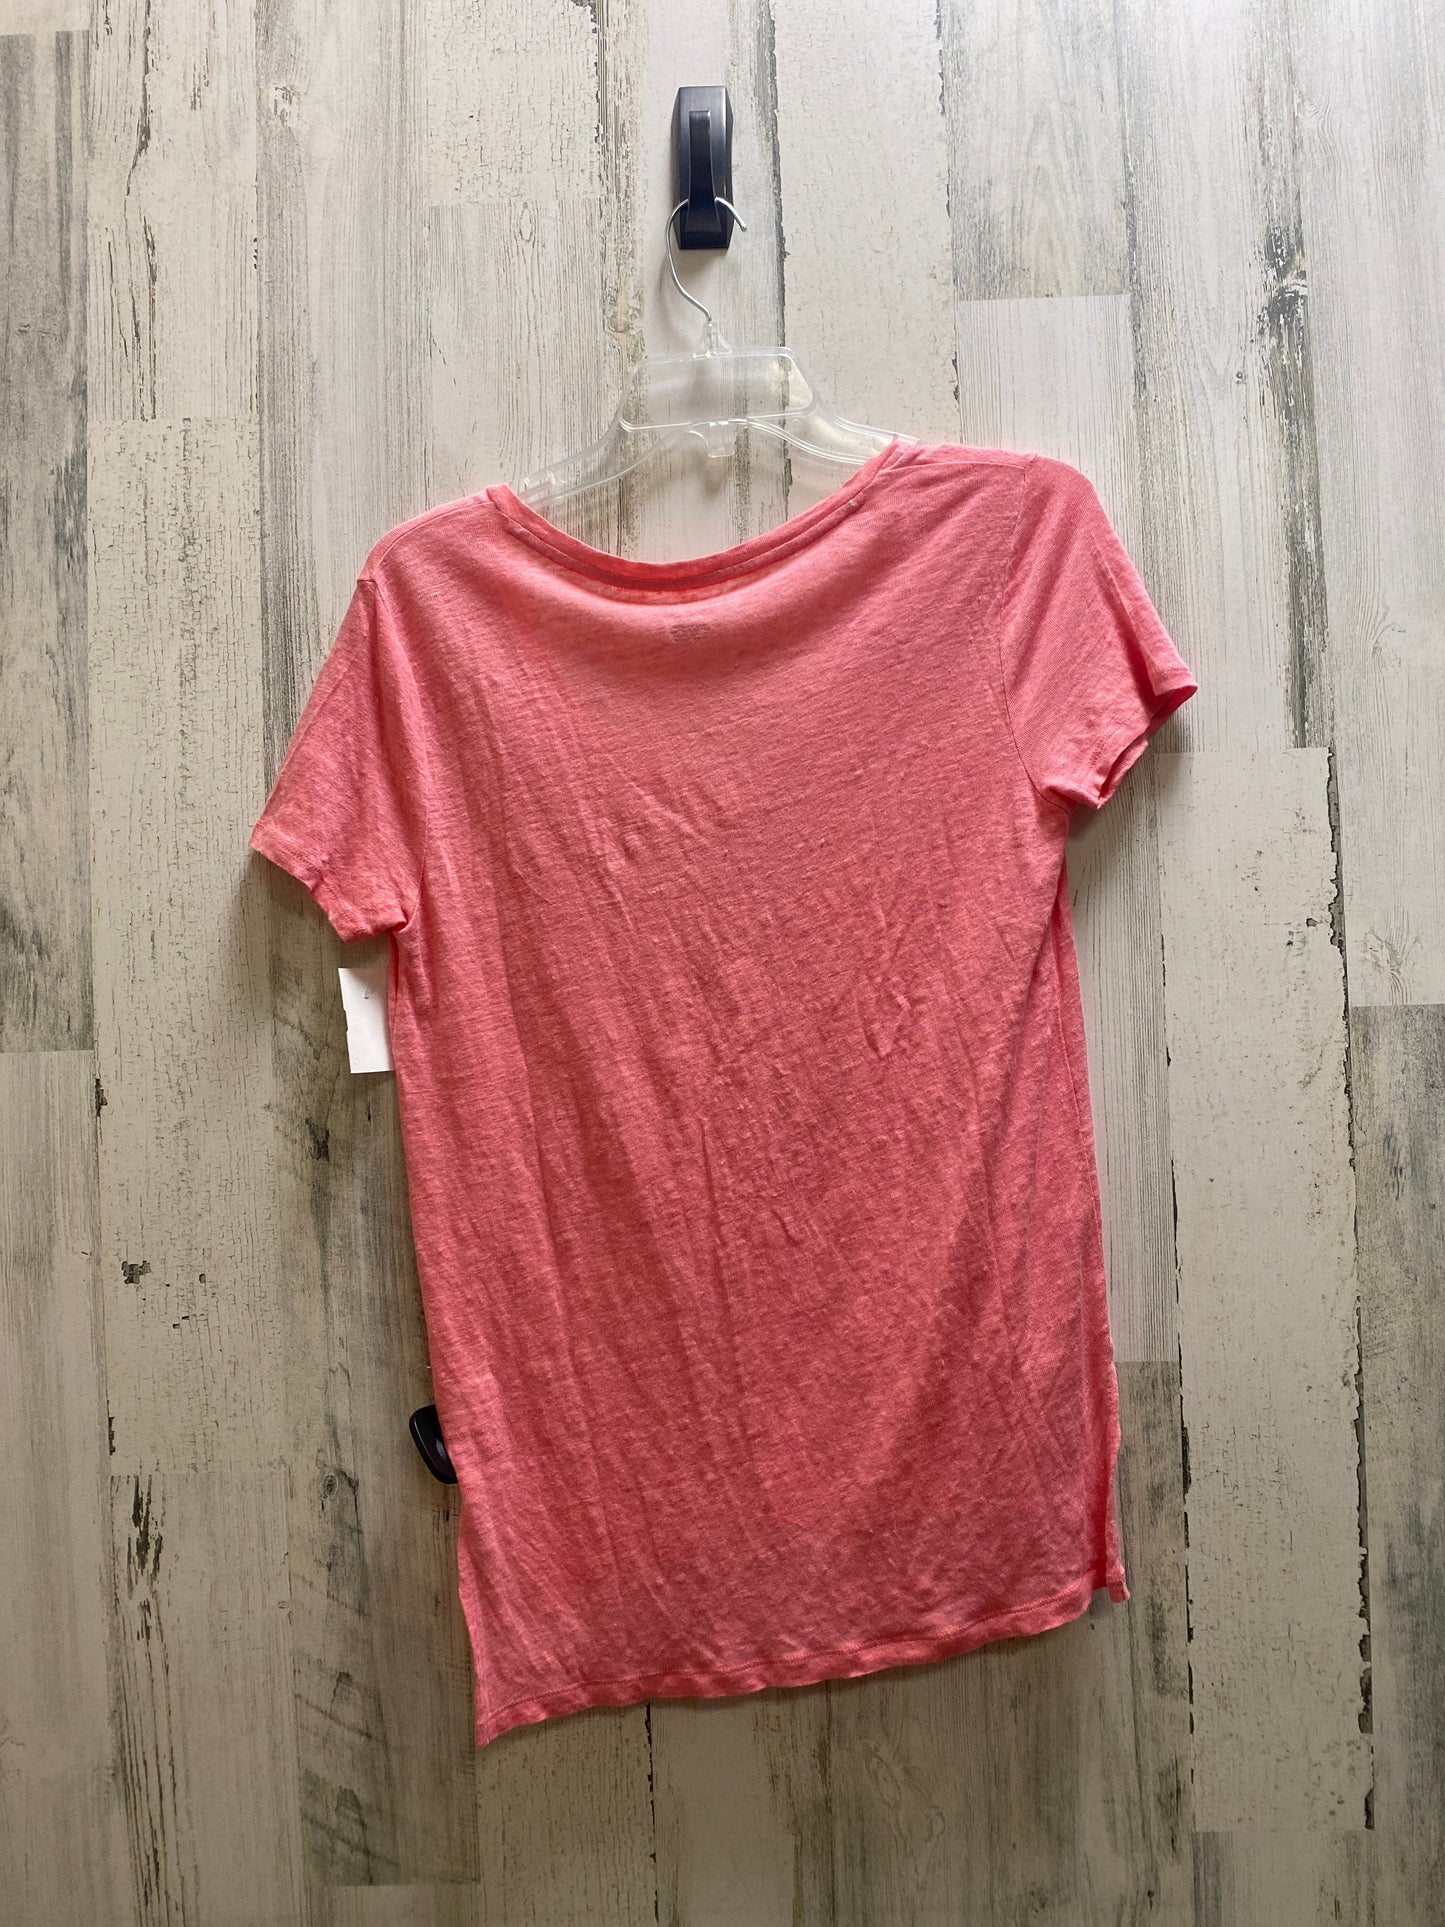 Top Short Sleeve Basic By Polo Ralph Lauren  Size: S